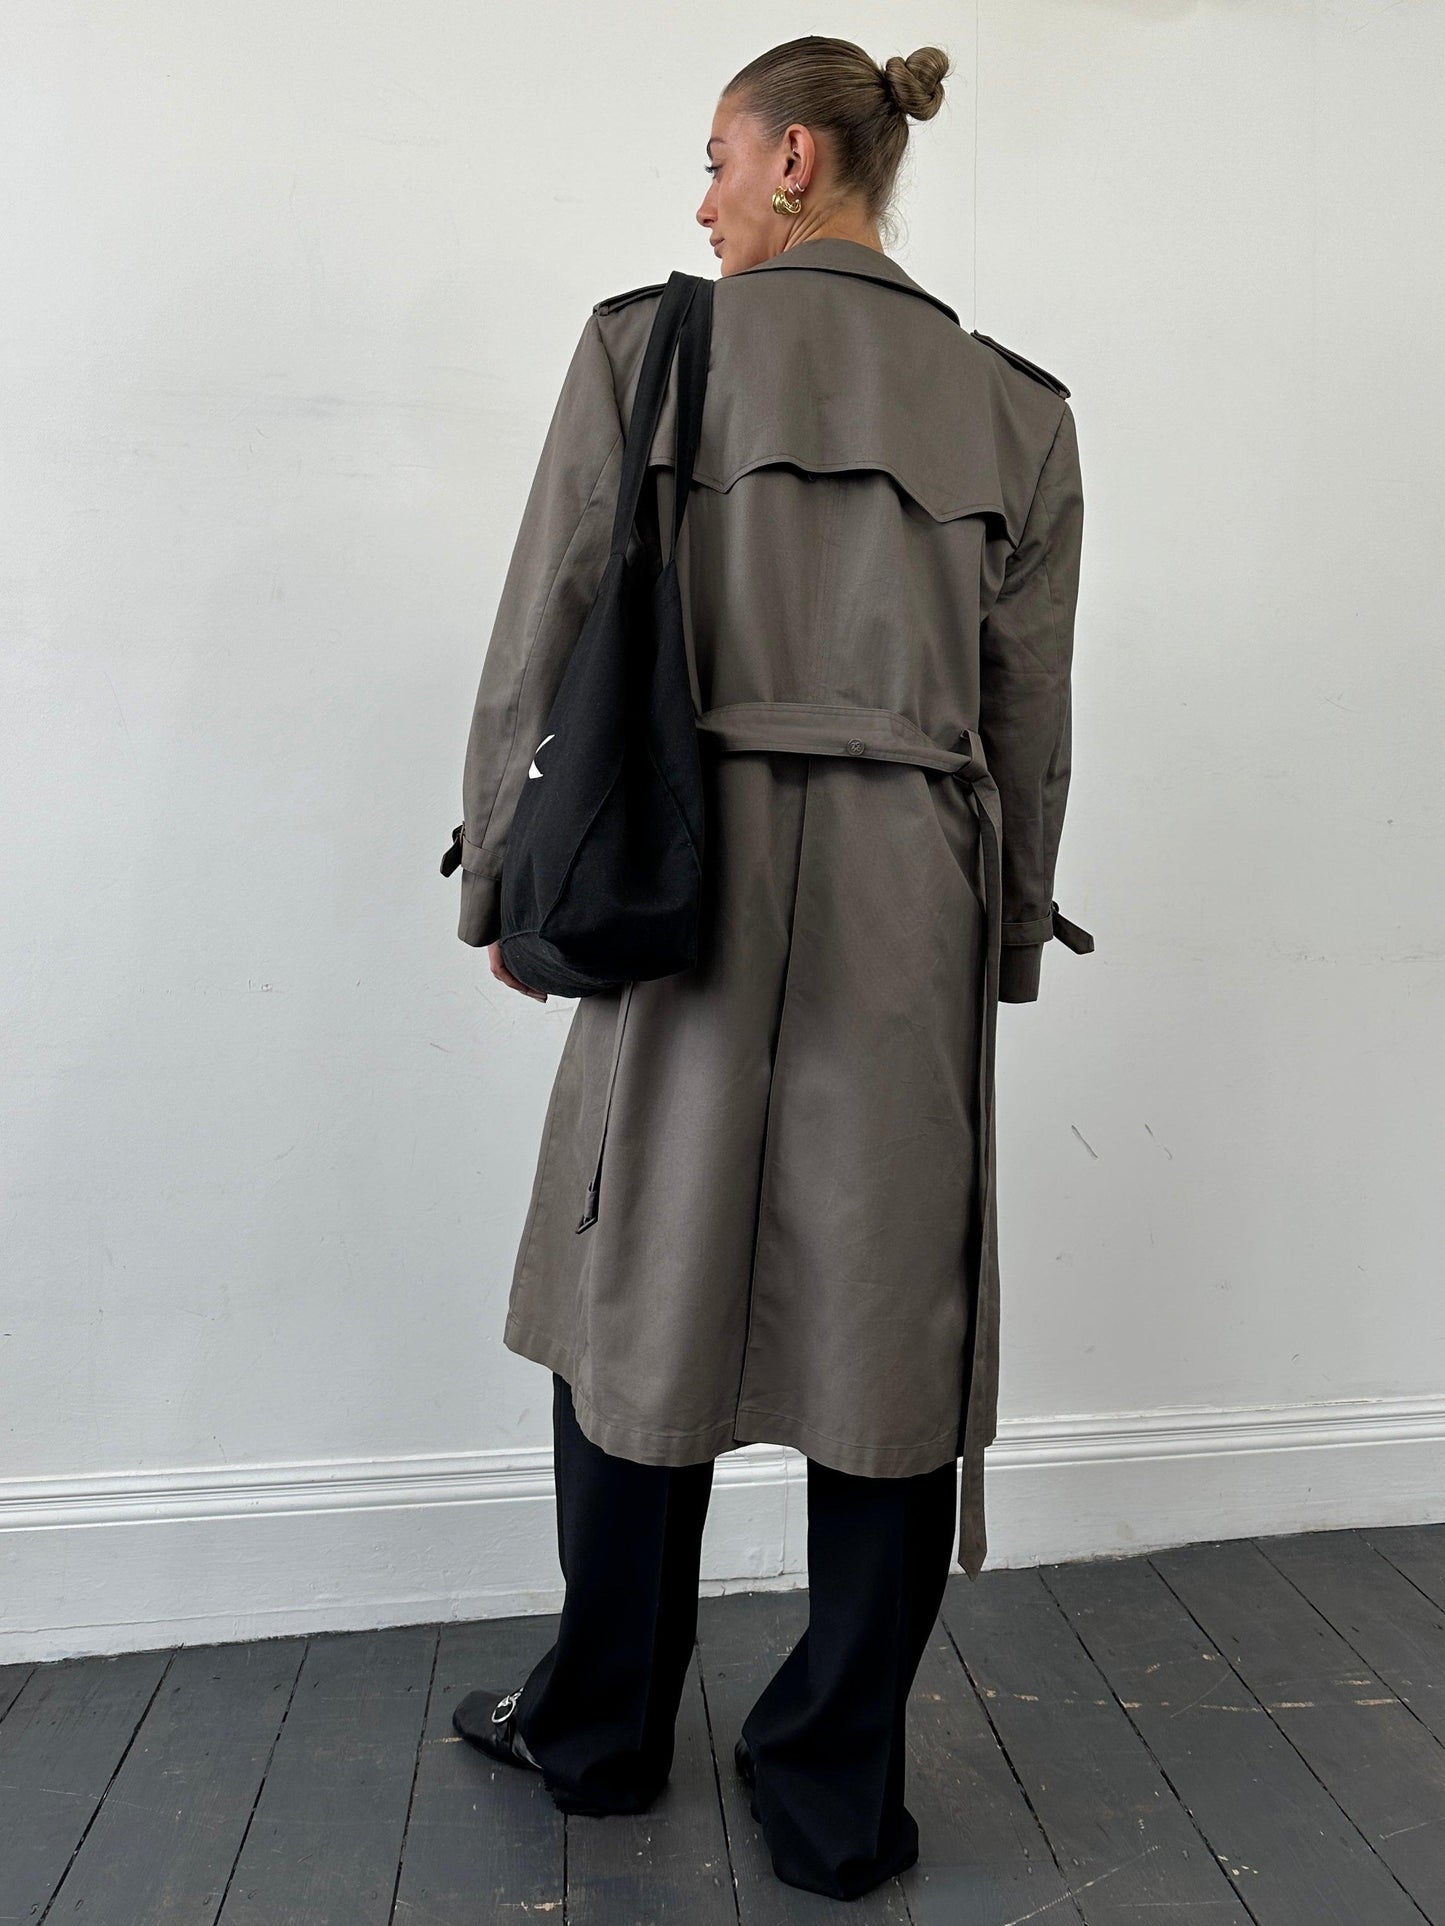 Christian Dior Monsieur Double Breasted Belted Trench Coat - M/L - Known Source